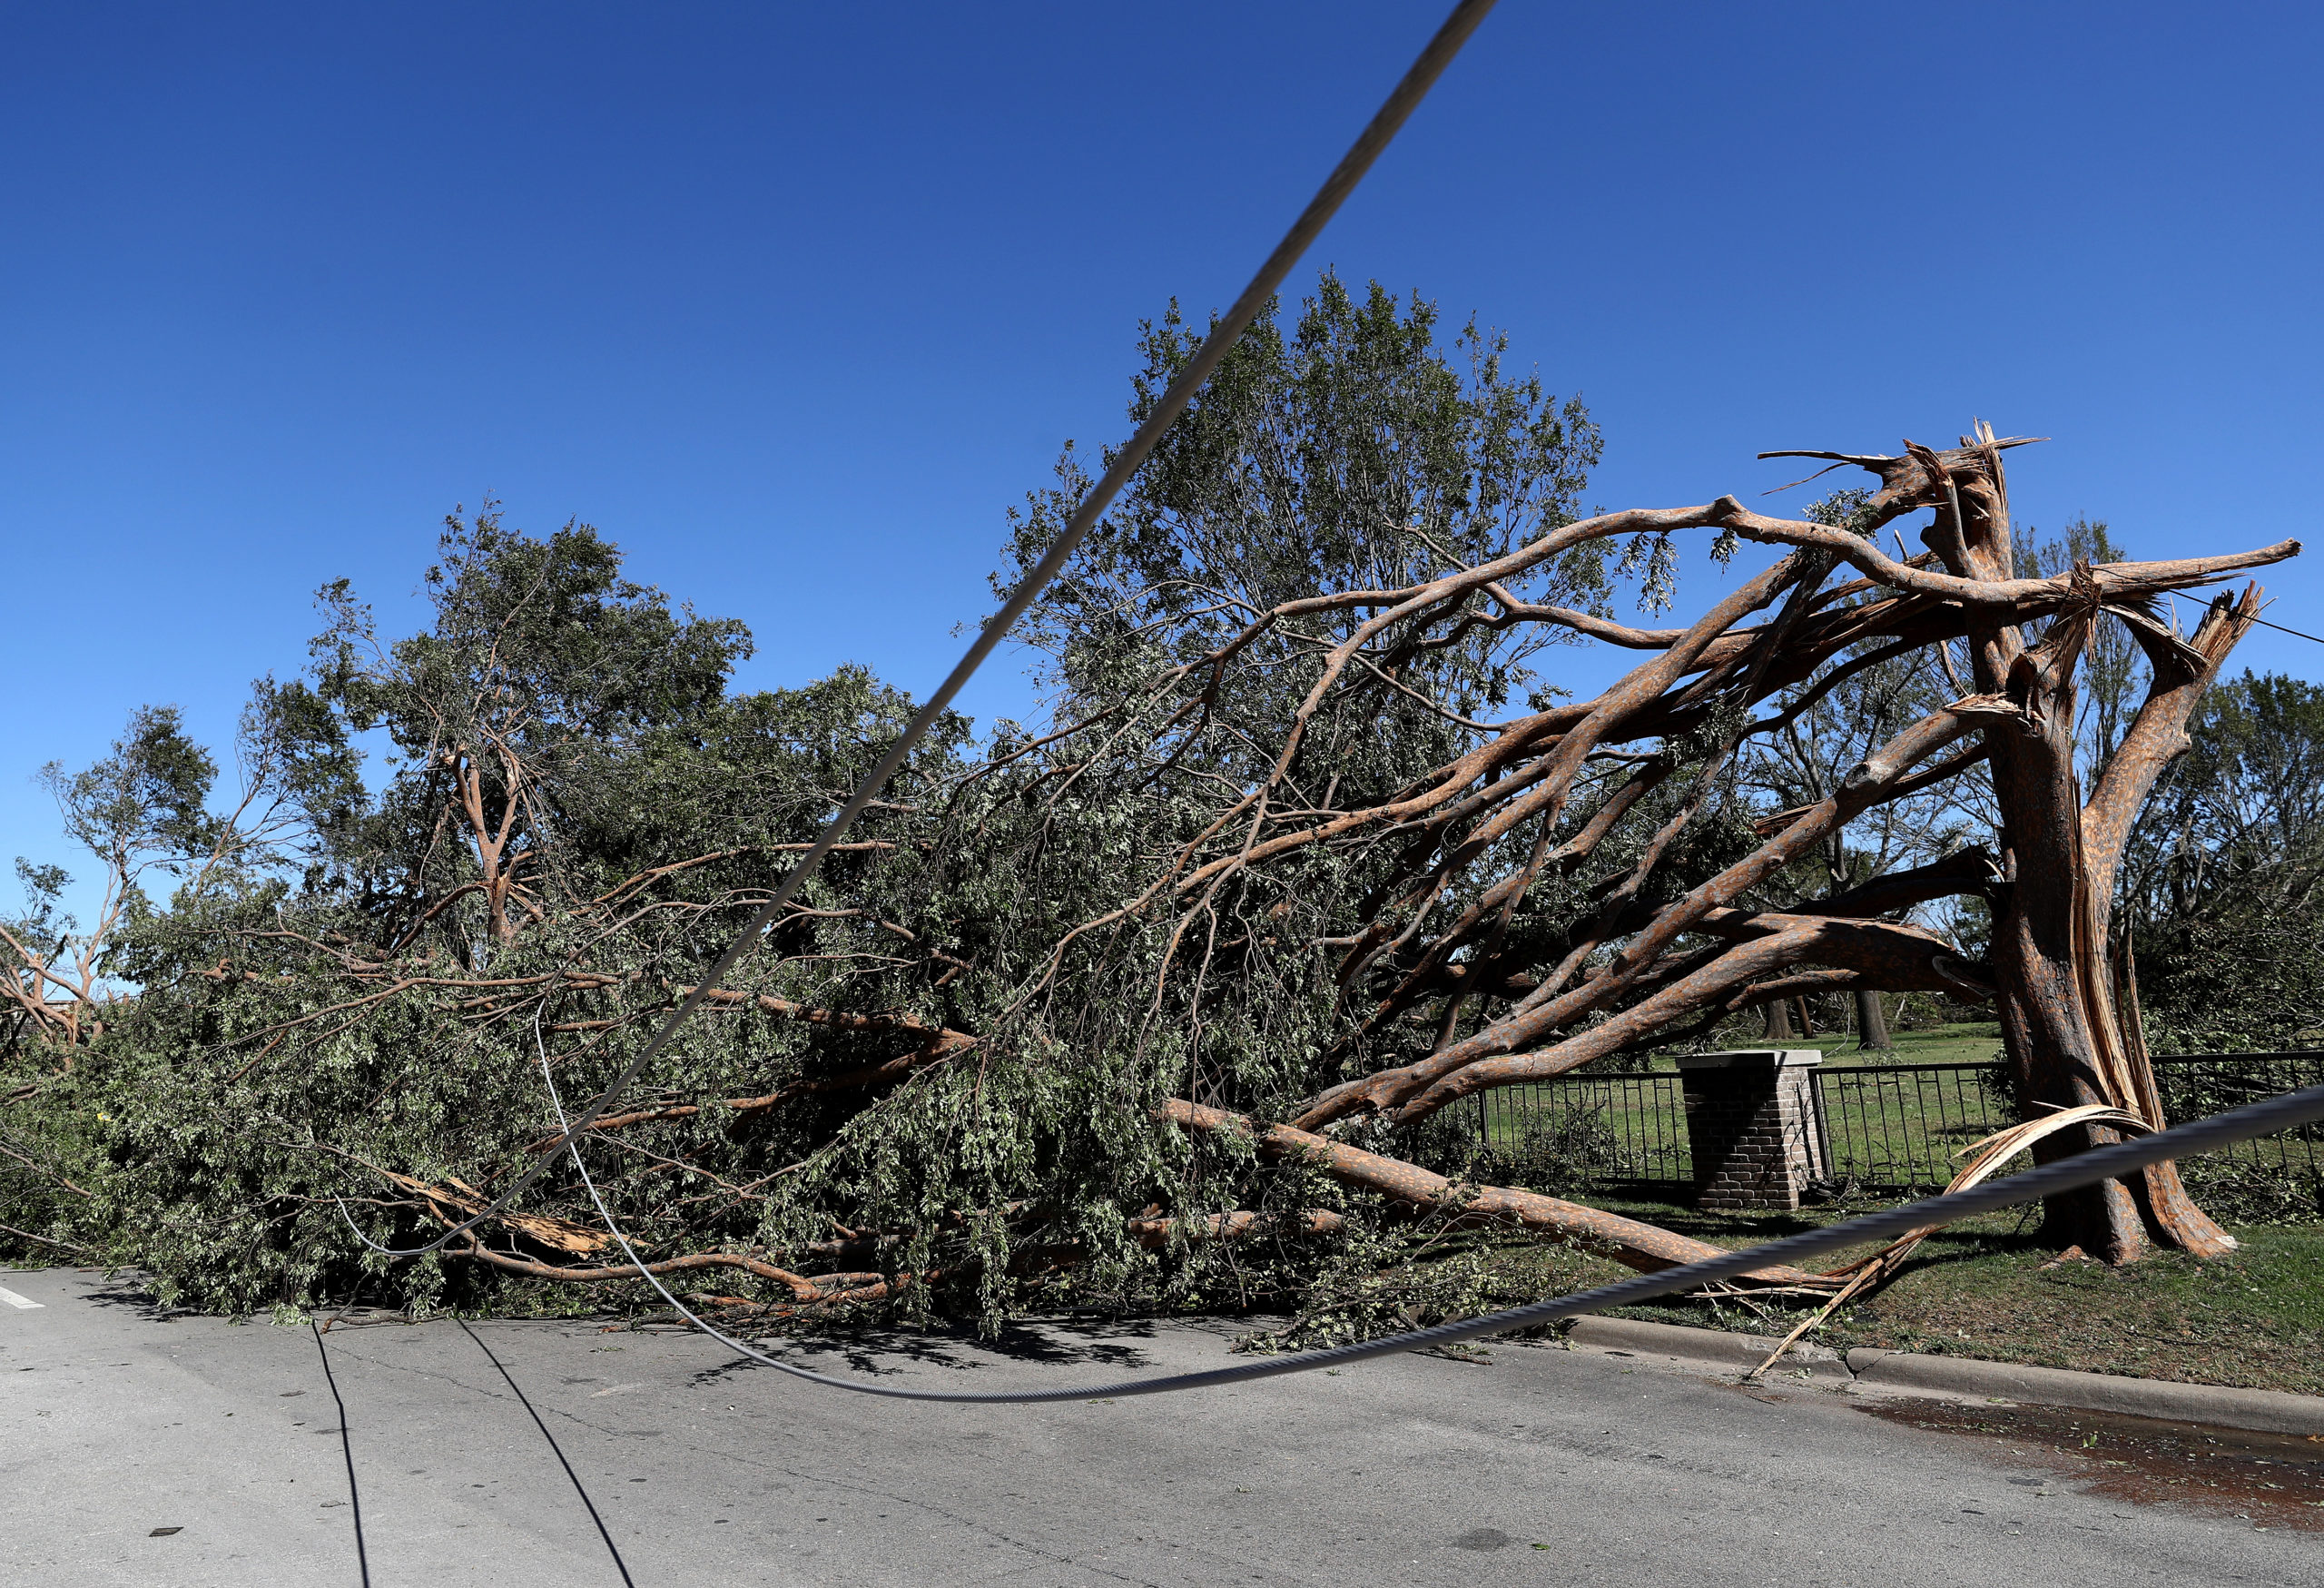 DALLAS, TEXAS - OCTOBER 21: Downed power lines run through fallen trees in the Preston Royal shopping on October 21, 2019 in Dallas, Texas. A tornado struck Sunday night causing major damage to homes, businesses and schools but no deaths or serious injuries have been reported. (Photo by Ronald Martinez/Getty Images)